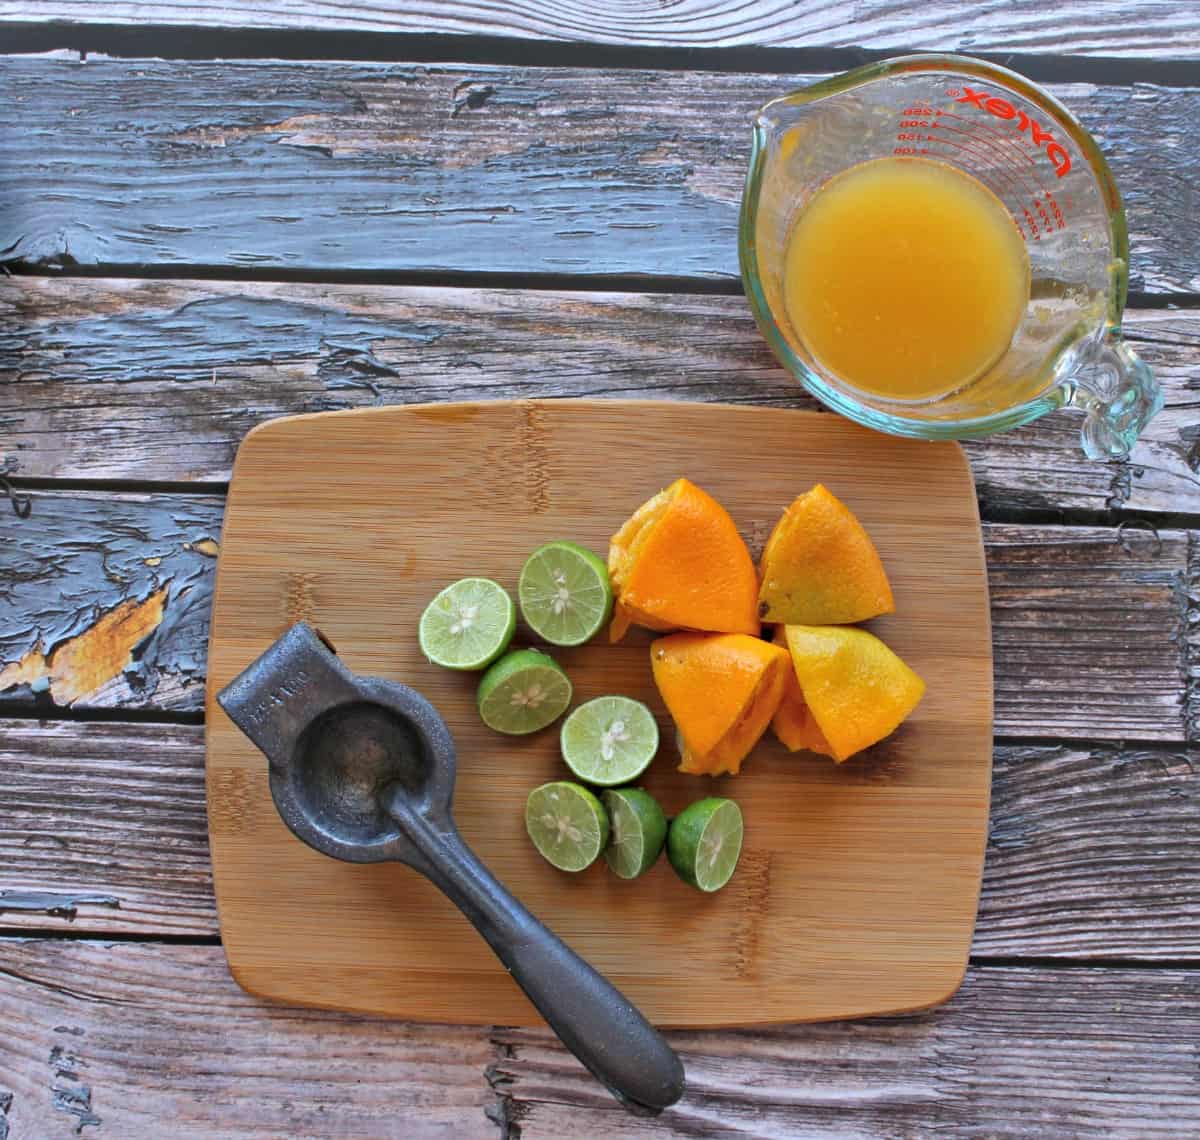 A citrus juicer, lime wedges, and orange wedges on a cutting board next to freshly squeezed orange juice.